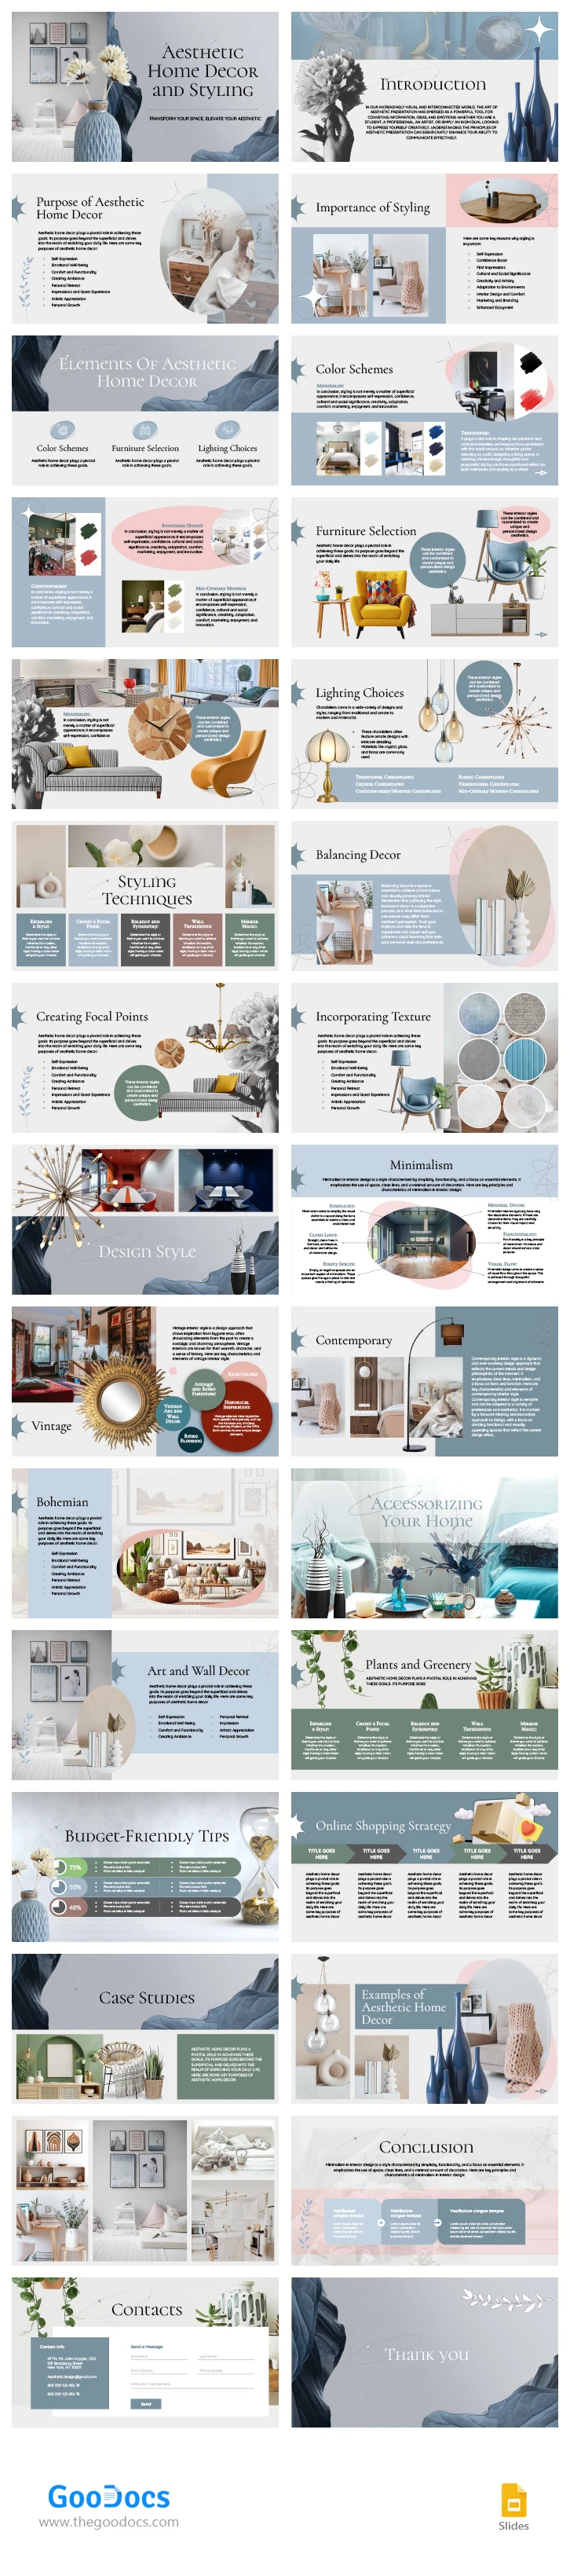 Aesthetic Home Decor and Styling - free Google Docs Template - 10067145